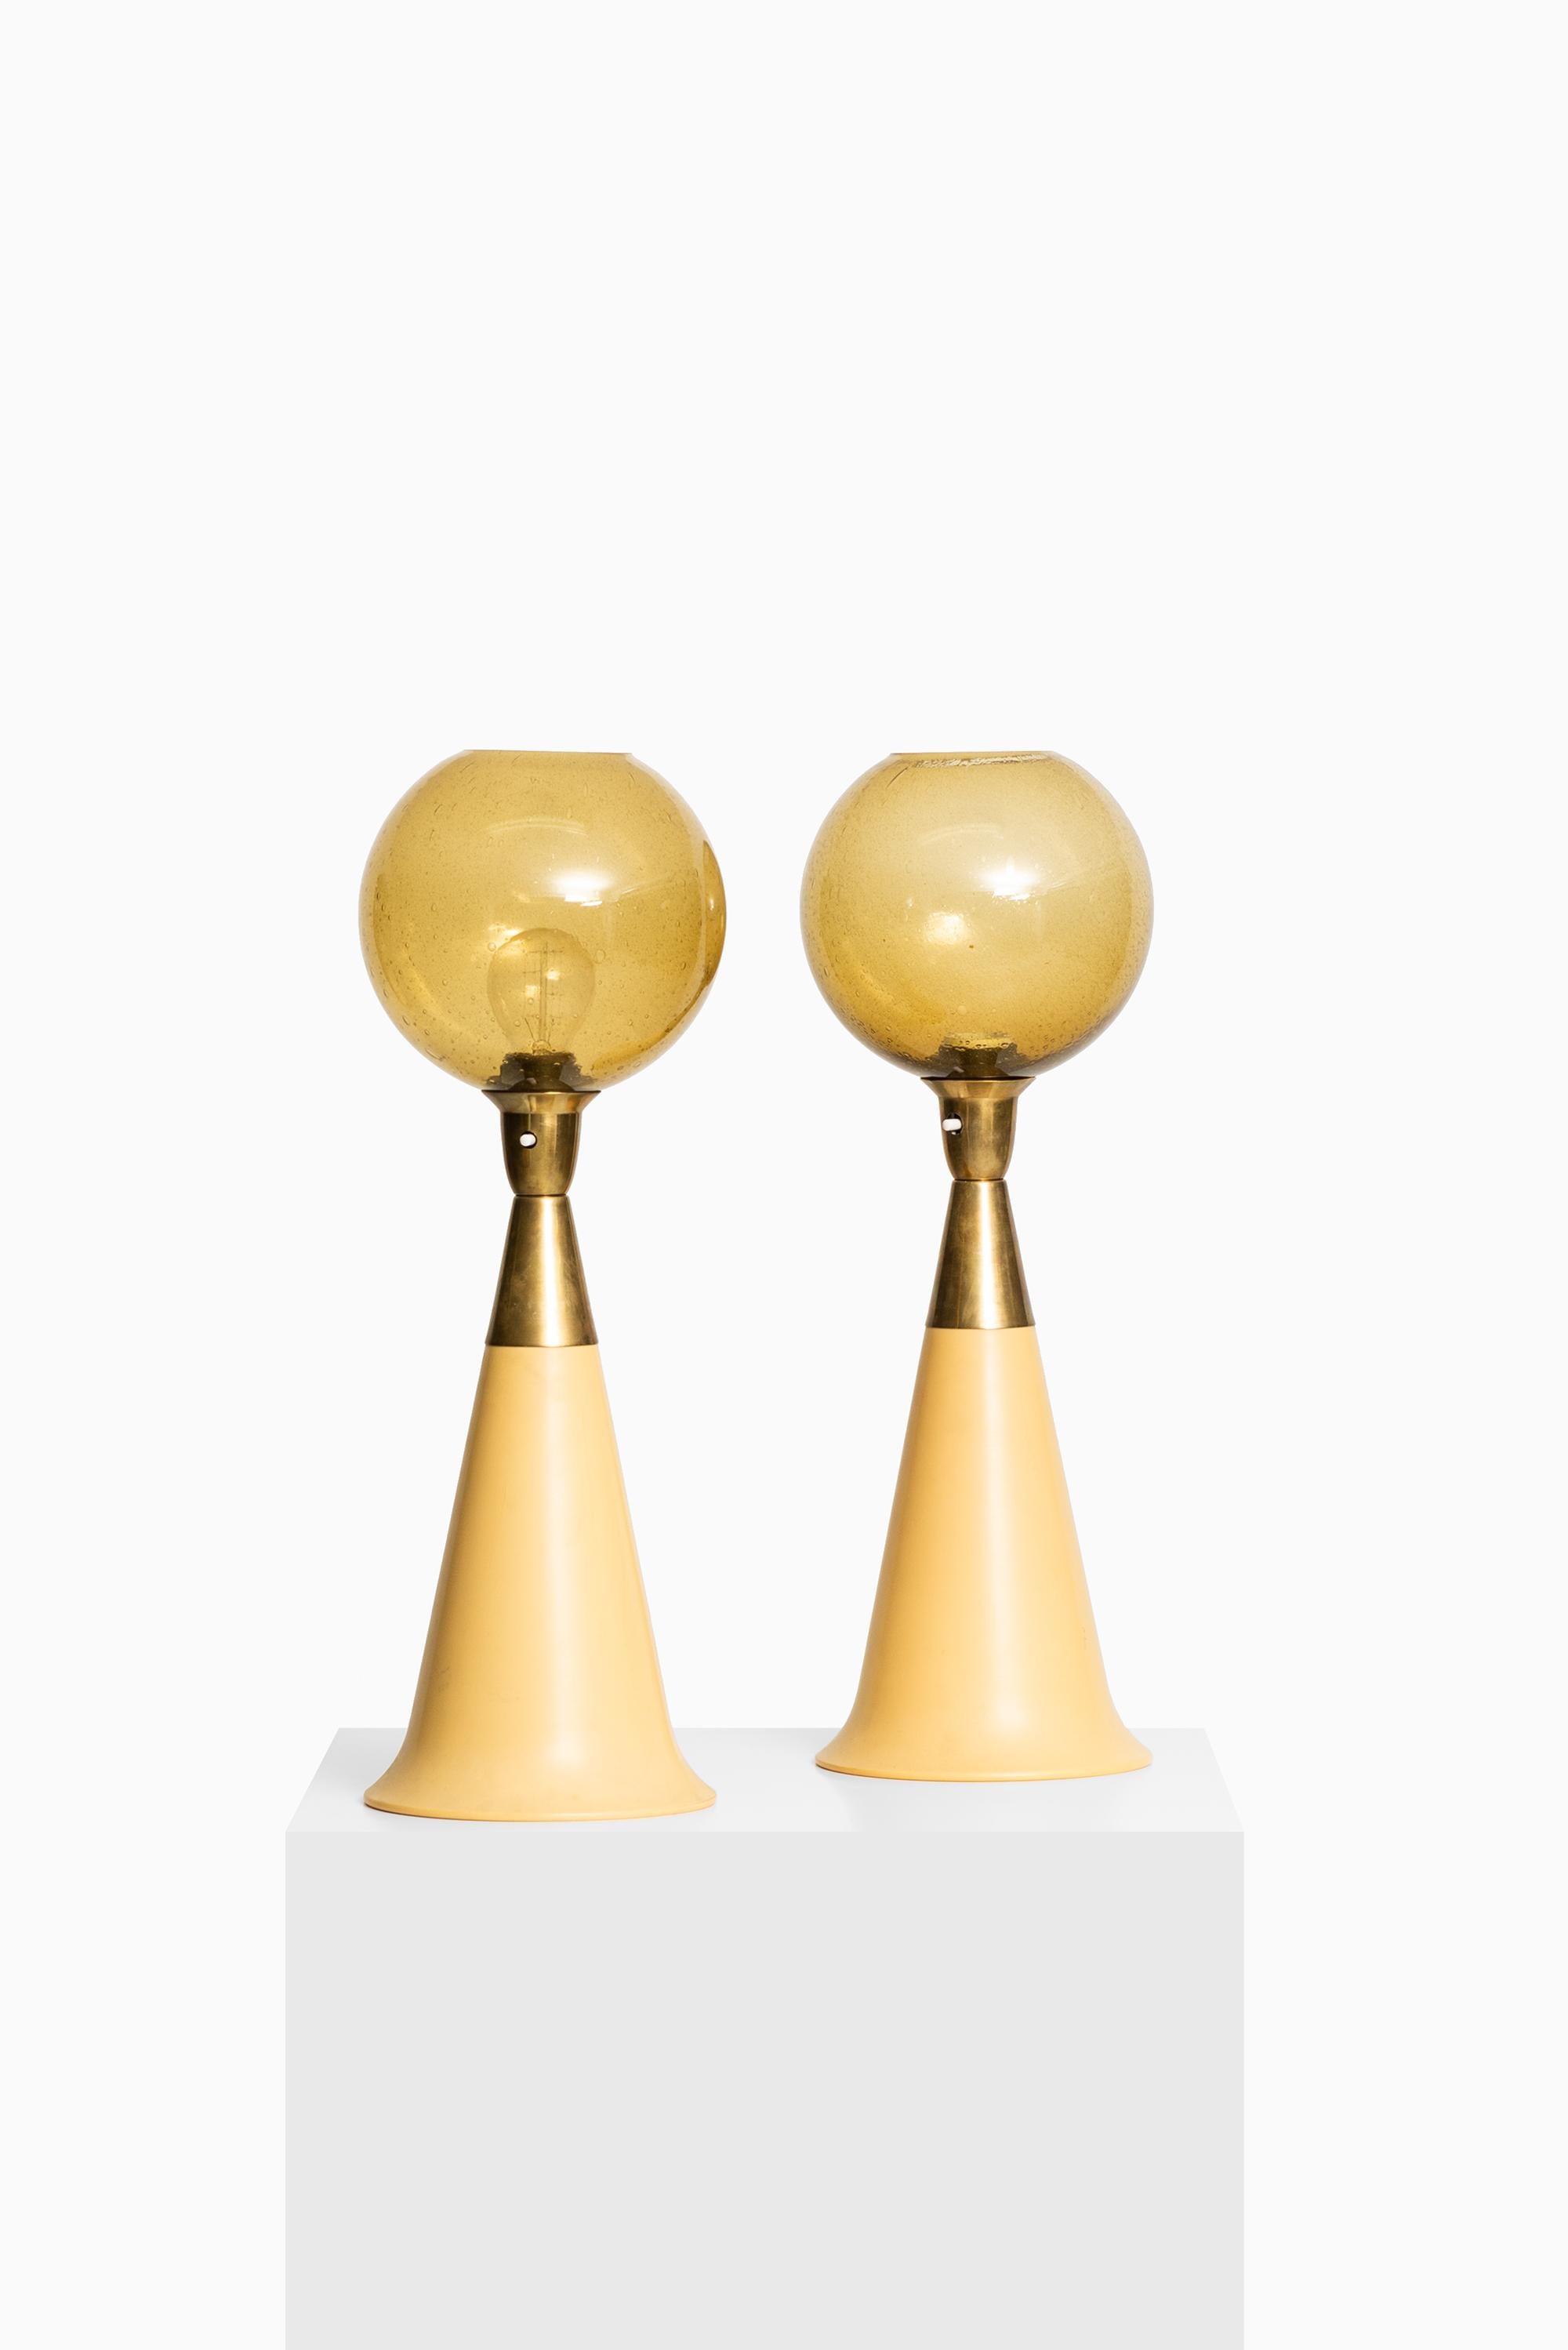 Scandinavian Modern Pair of Table Lamps by Unknown Designer Produced in Sweden For Sale